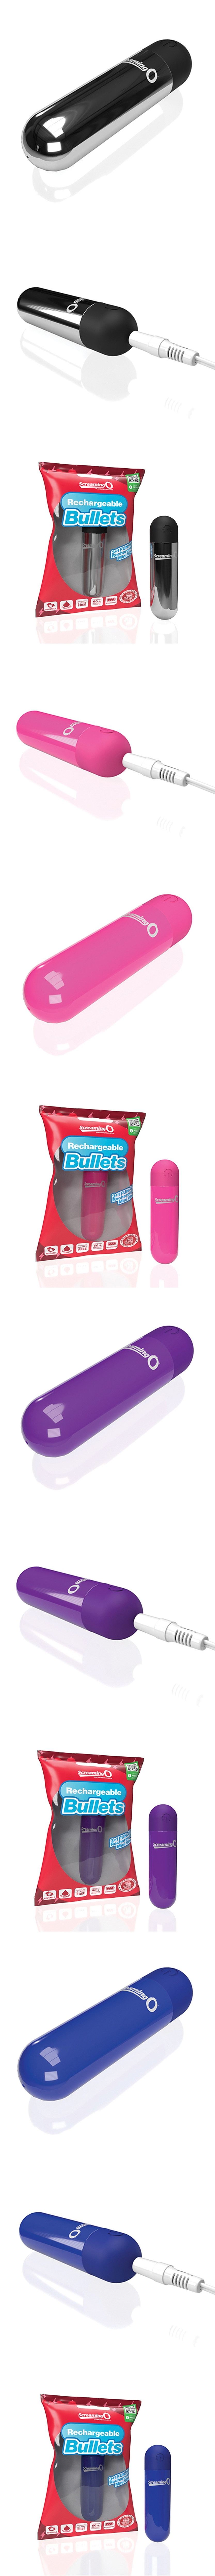 Screaming O Rechargeable Bullet Vibrator